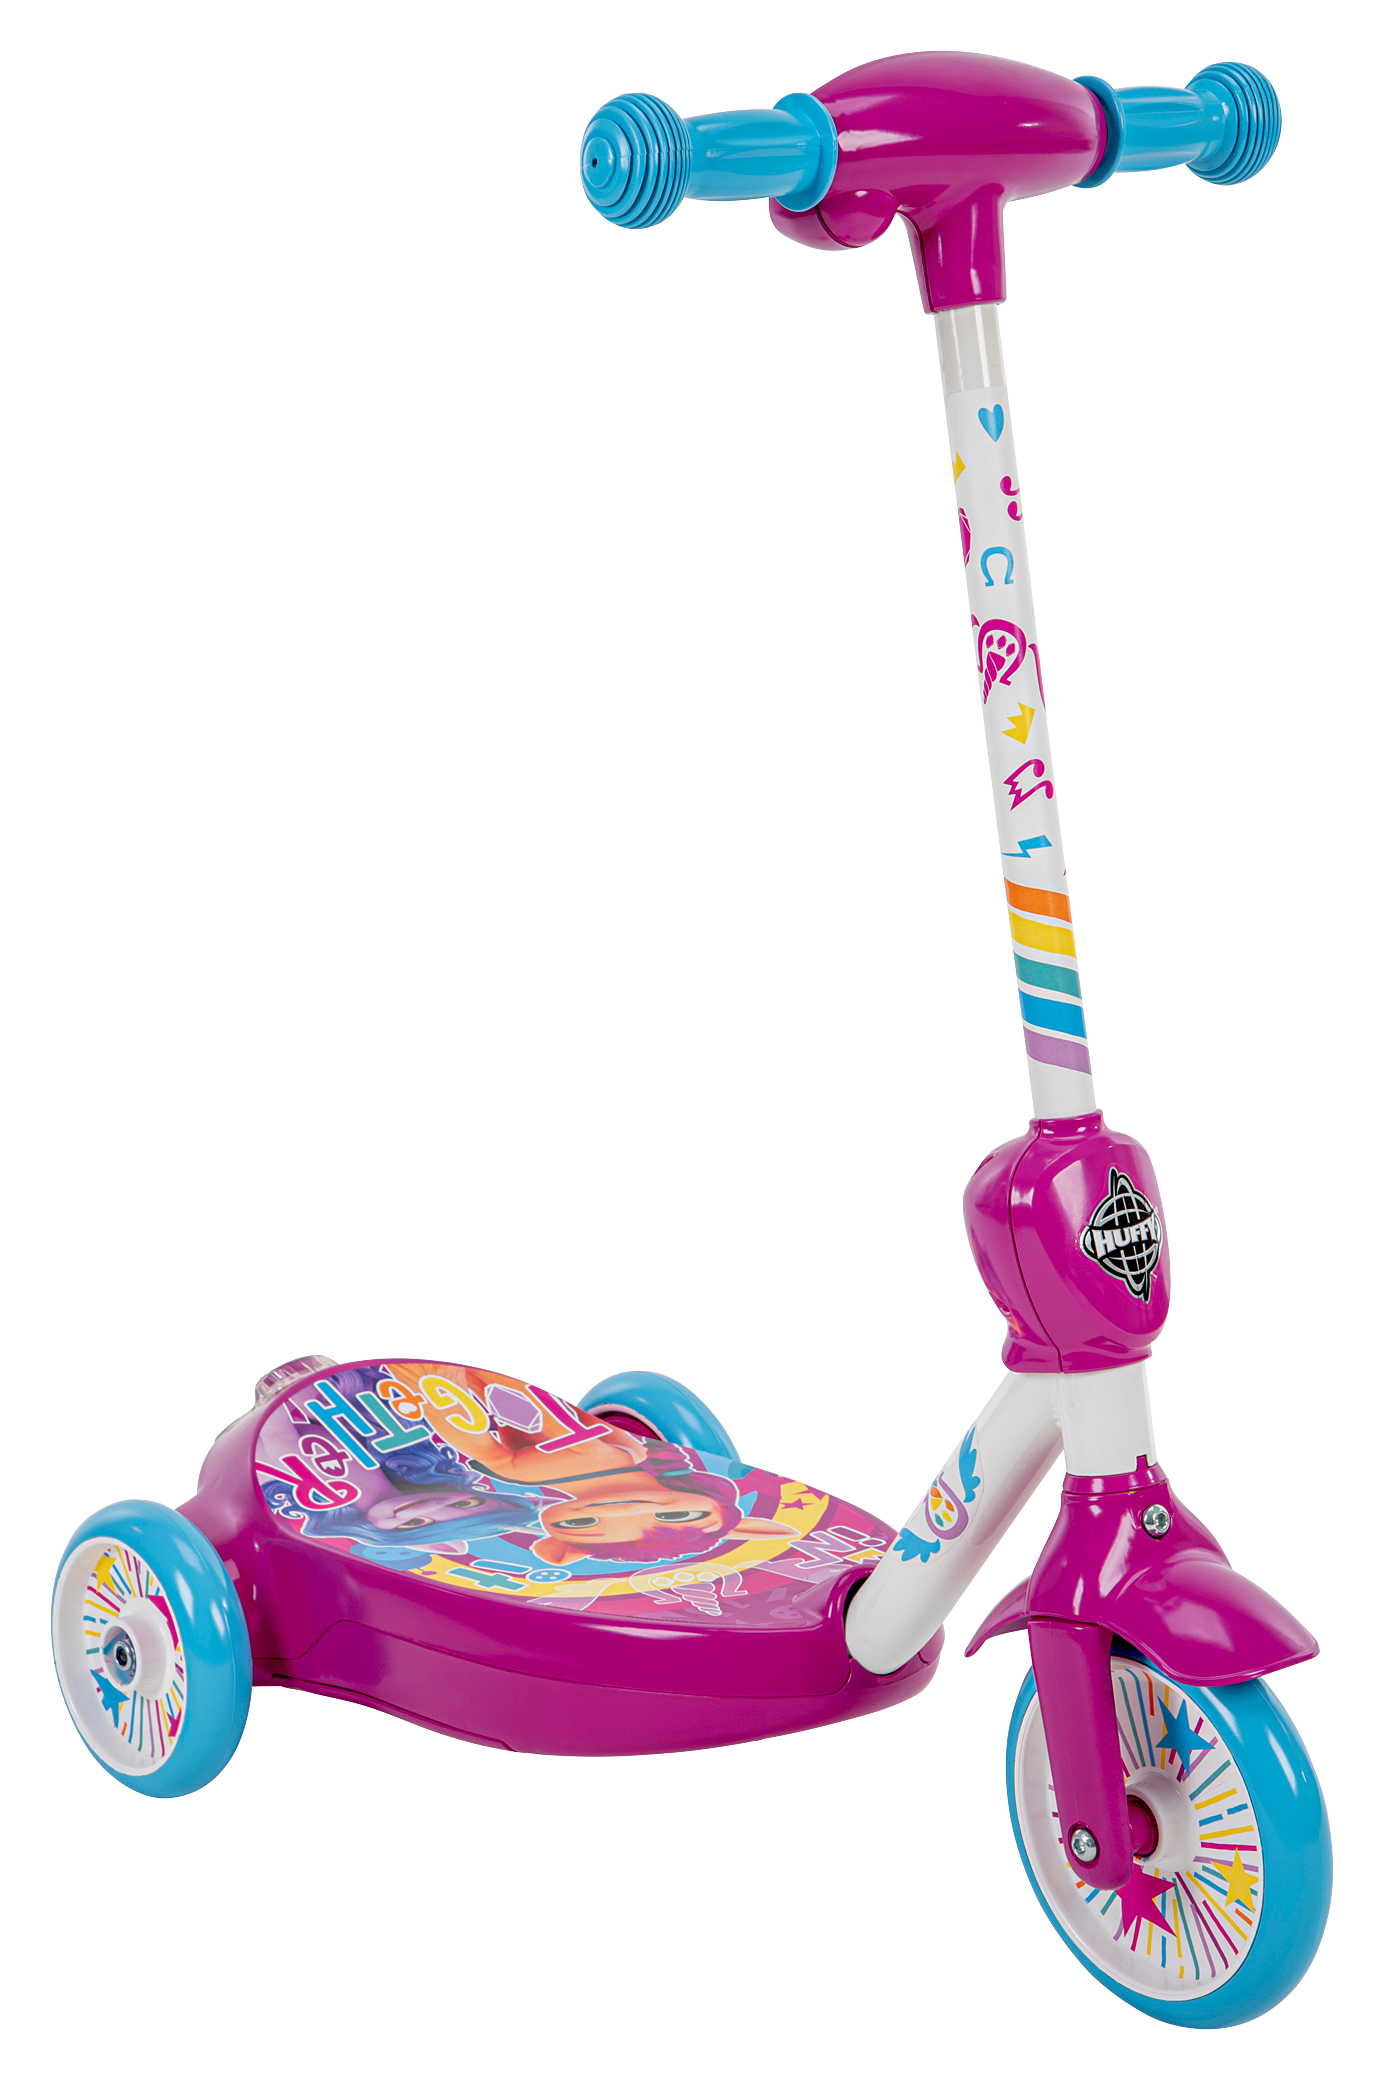 Huffy My Little Pony Bubble Scooter 6V Ride-On Toy for Kids